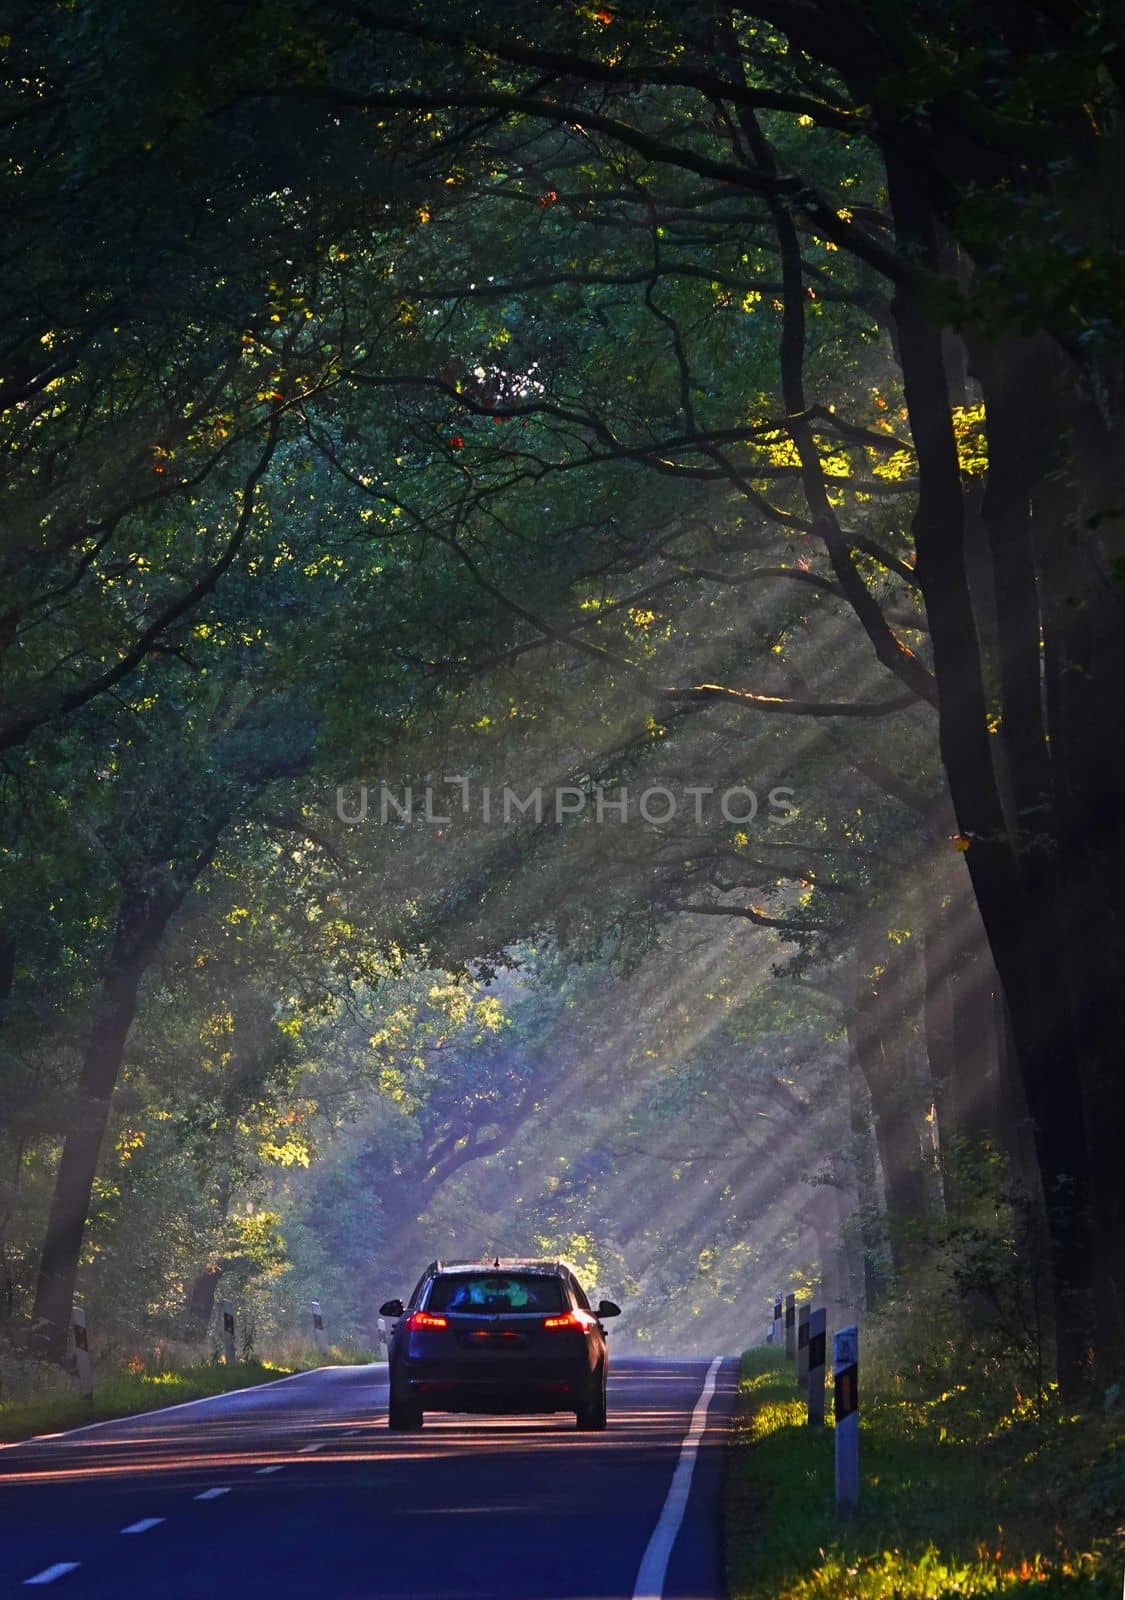 Morning on a country road in the woods. Sun's rays pass through the trees. A car is passing